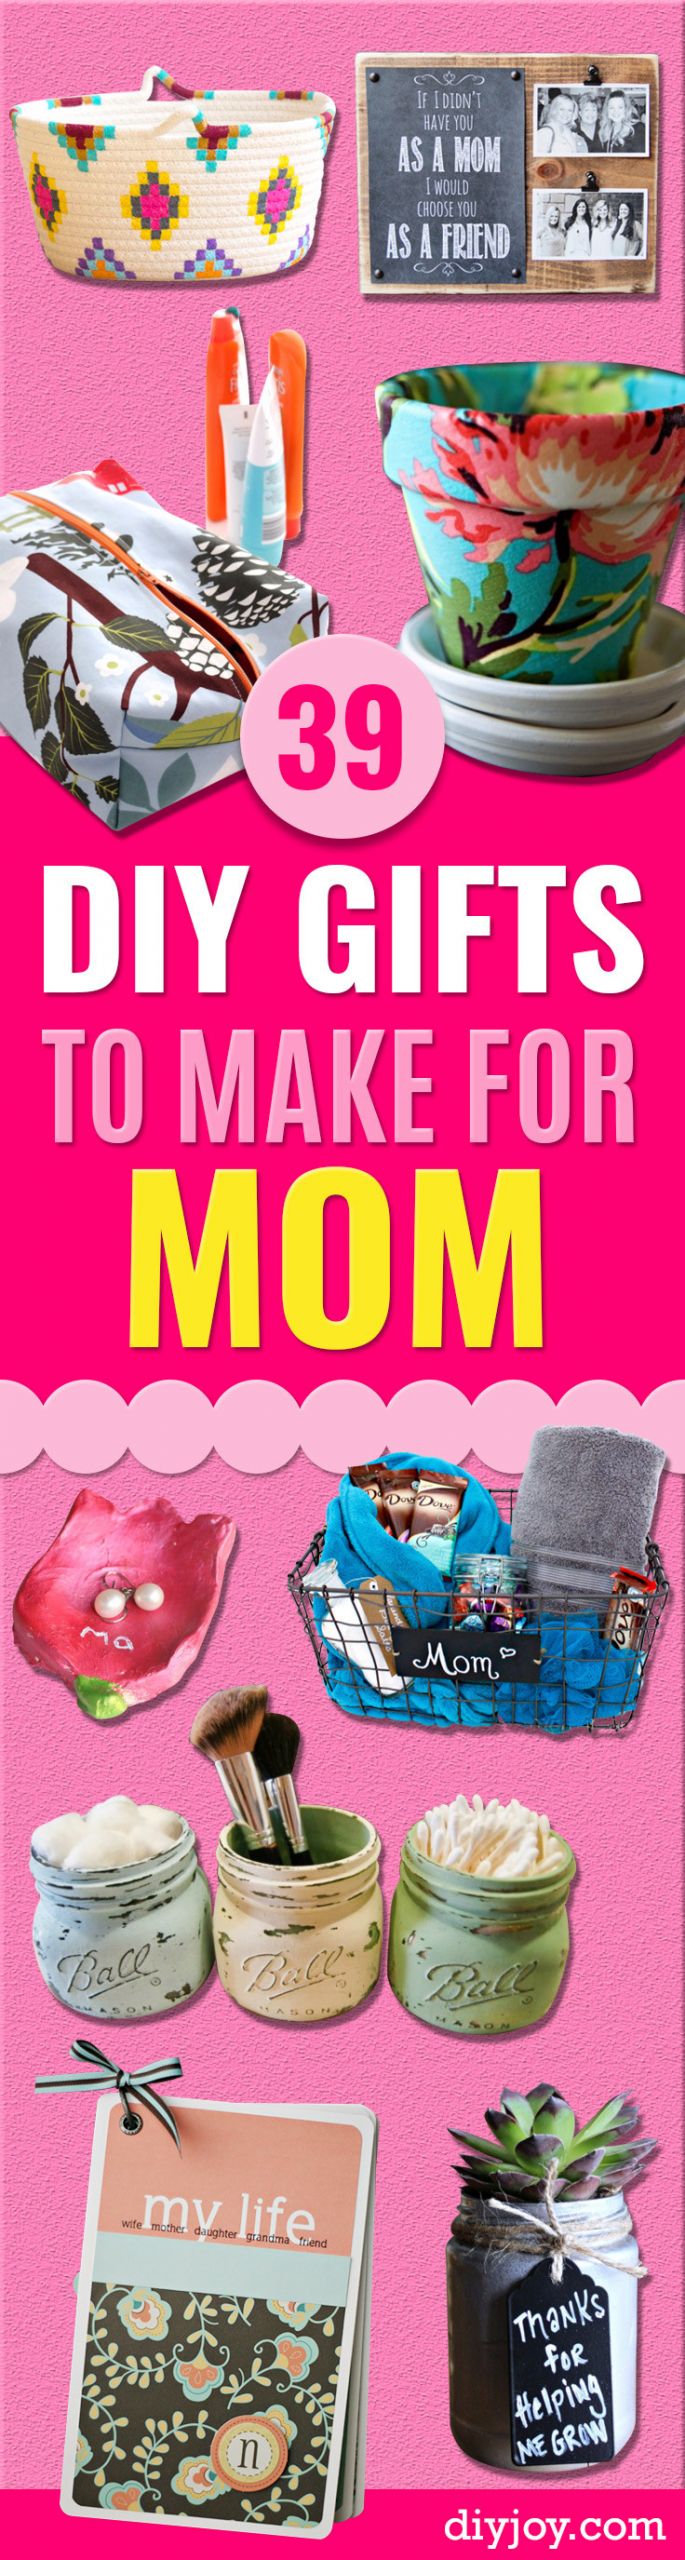 Best DIY Gifts For Mom
 39 Creative DIY Gifts to Make for Mom